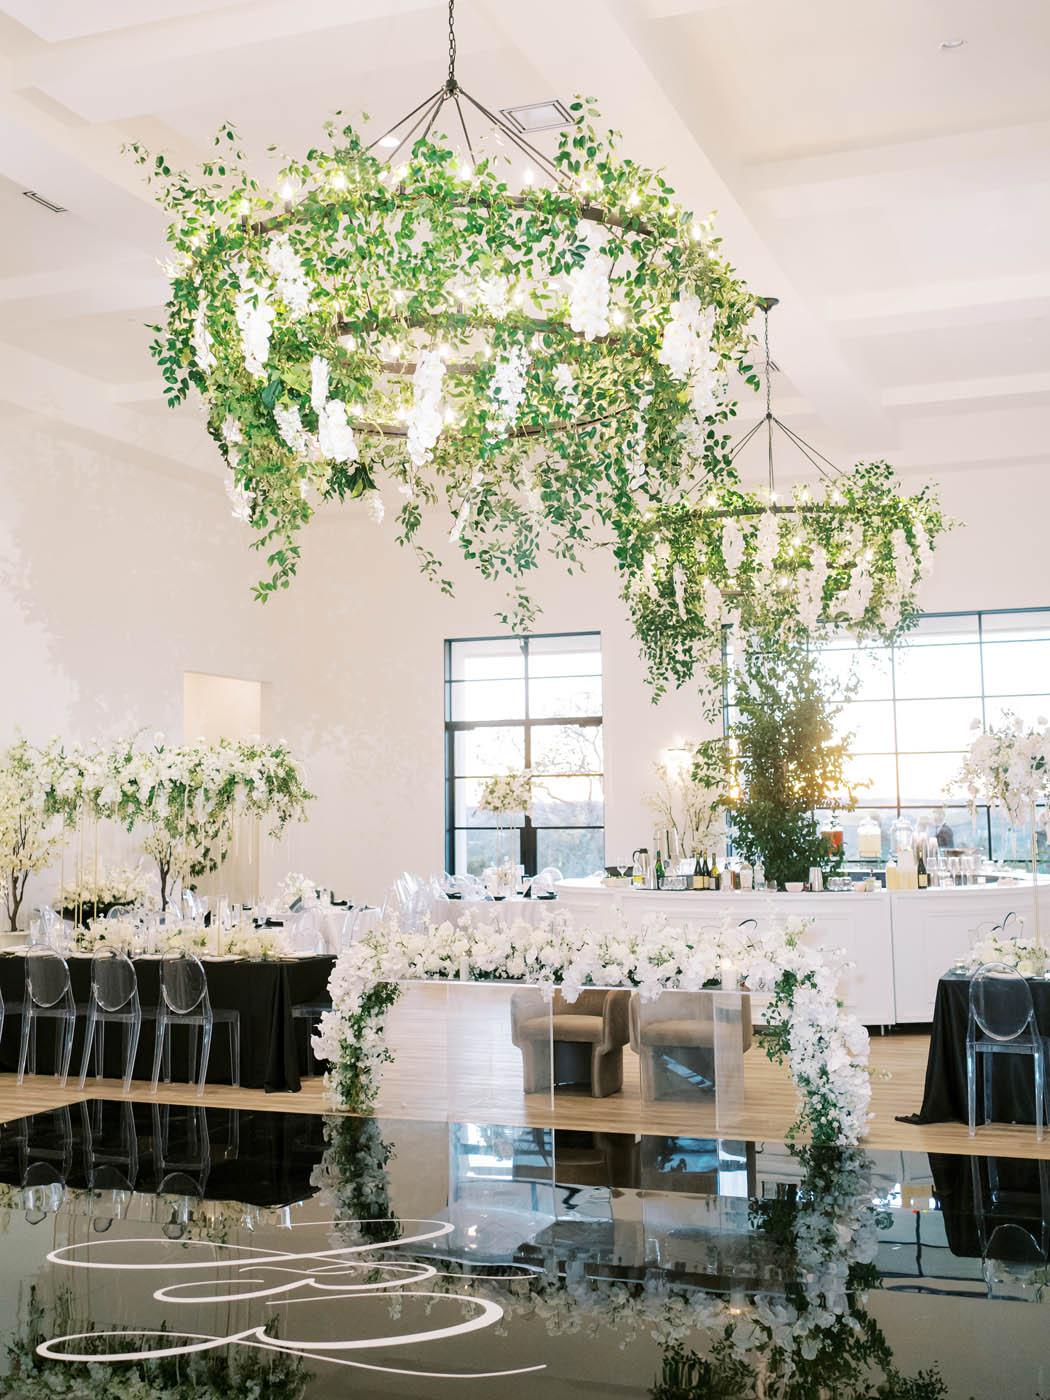 White and green florals drip down from the ceiling for this modern sleek reception